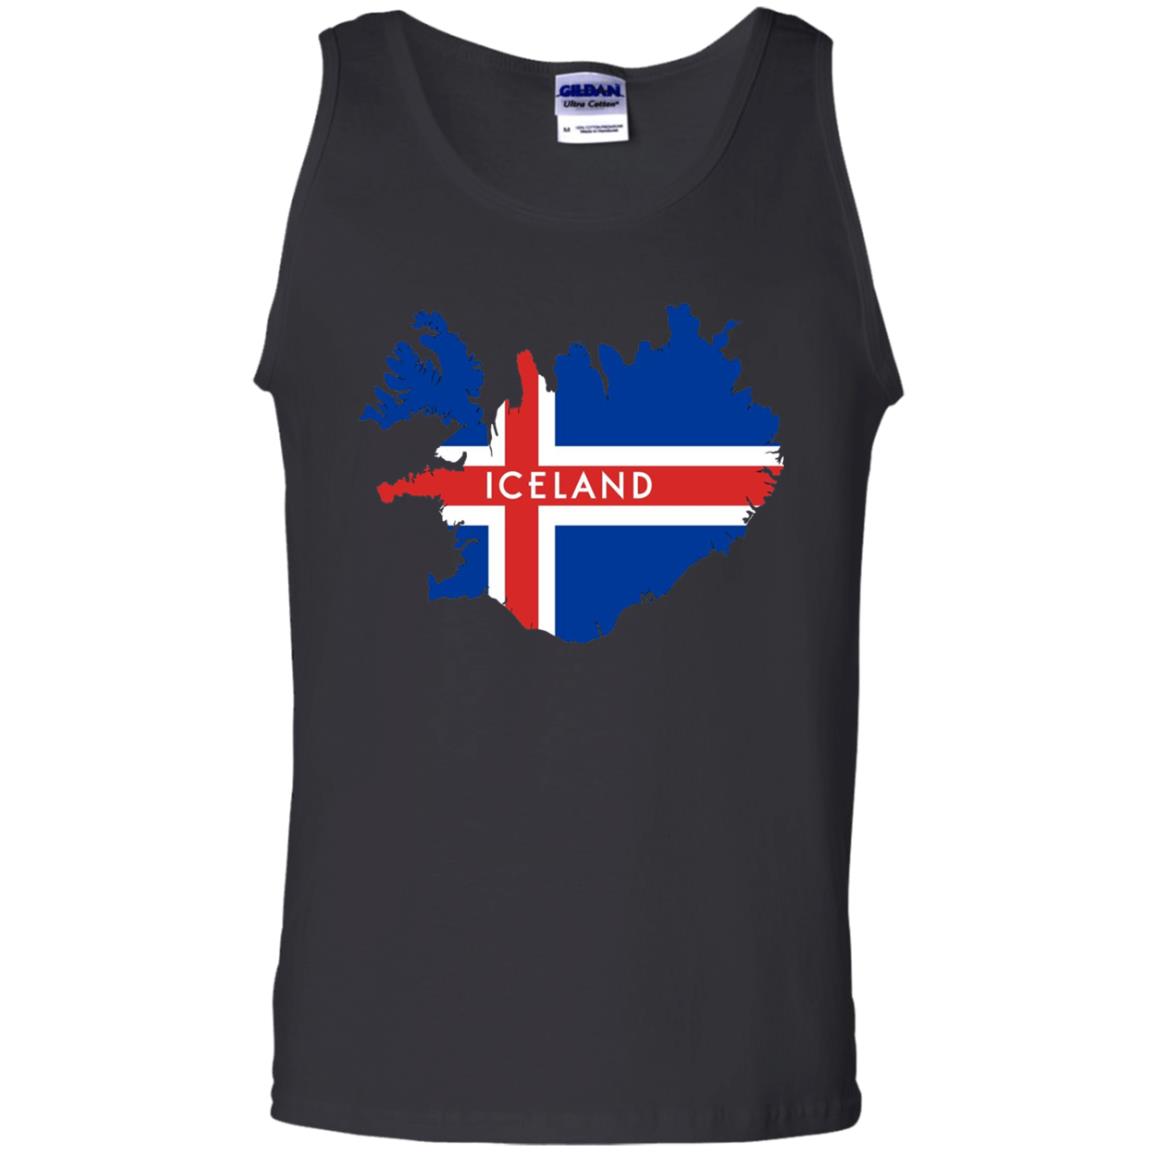 Iceland T-shirt With Flag And Map